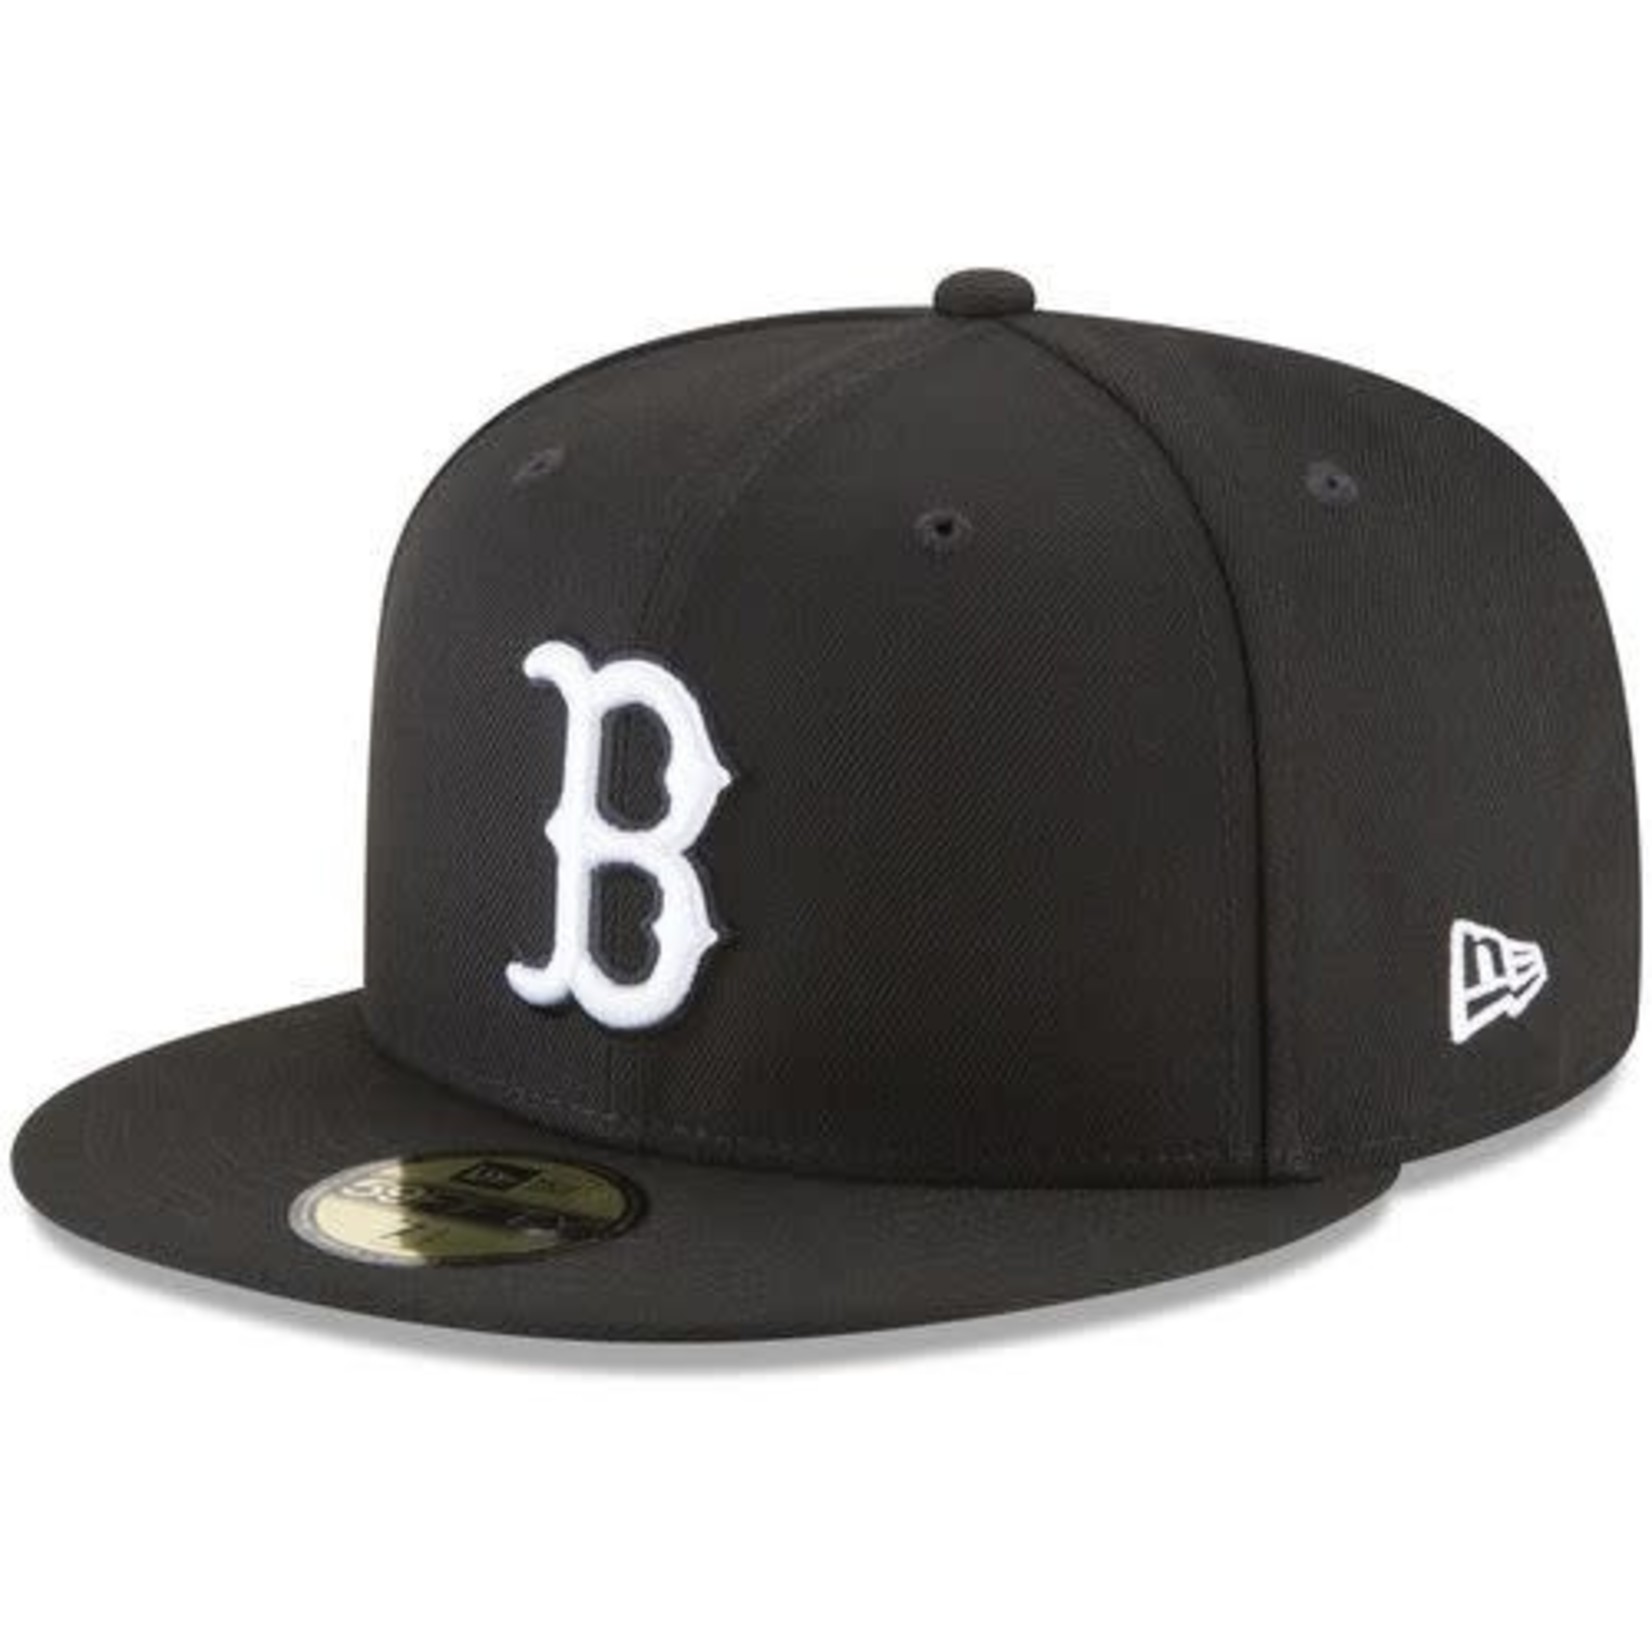 New Era Men's New Era Black Boston Red Sox 59FIFTY Fitted Hat